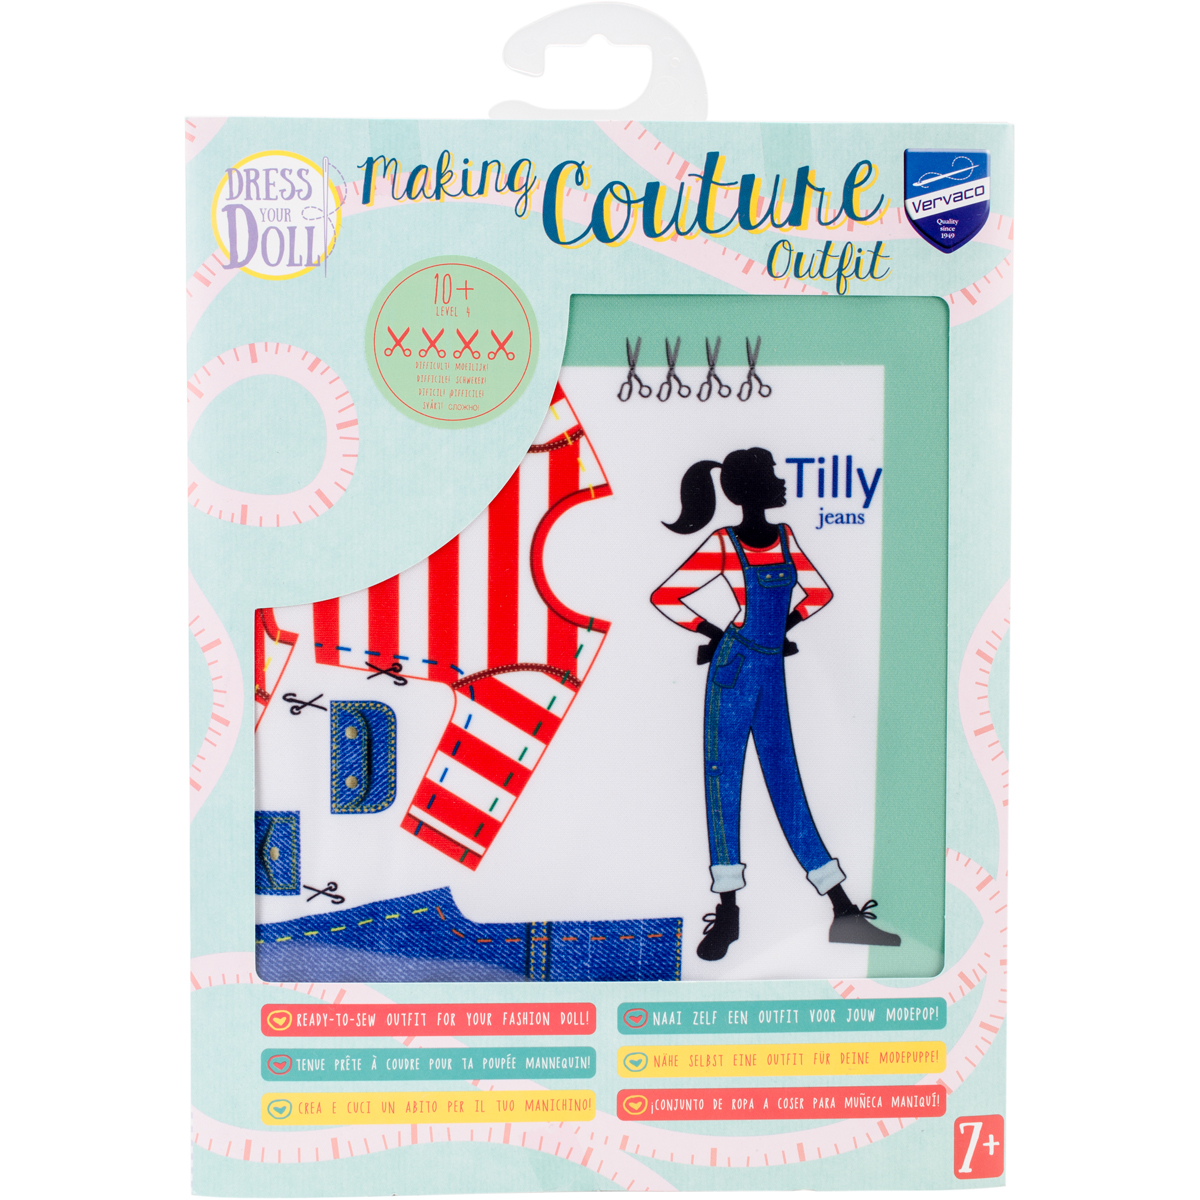 V0164668 Dress Your Doll Making Couture Outfit Set - Tilly Jeans